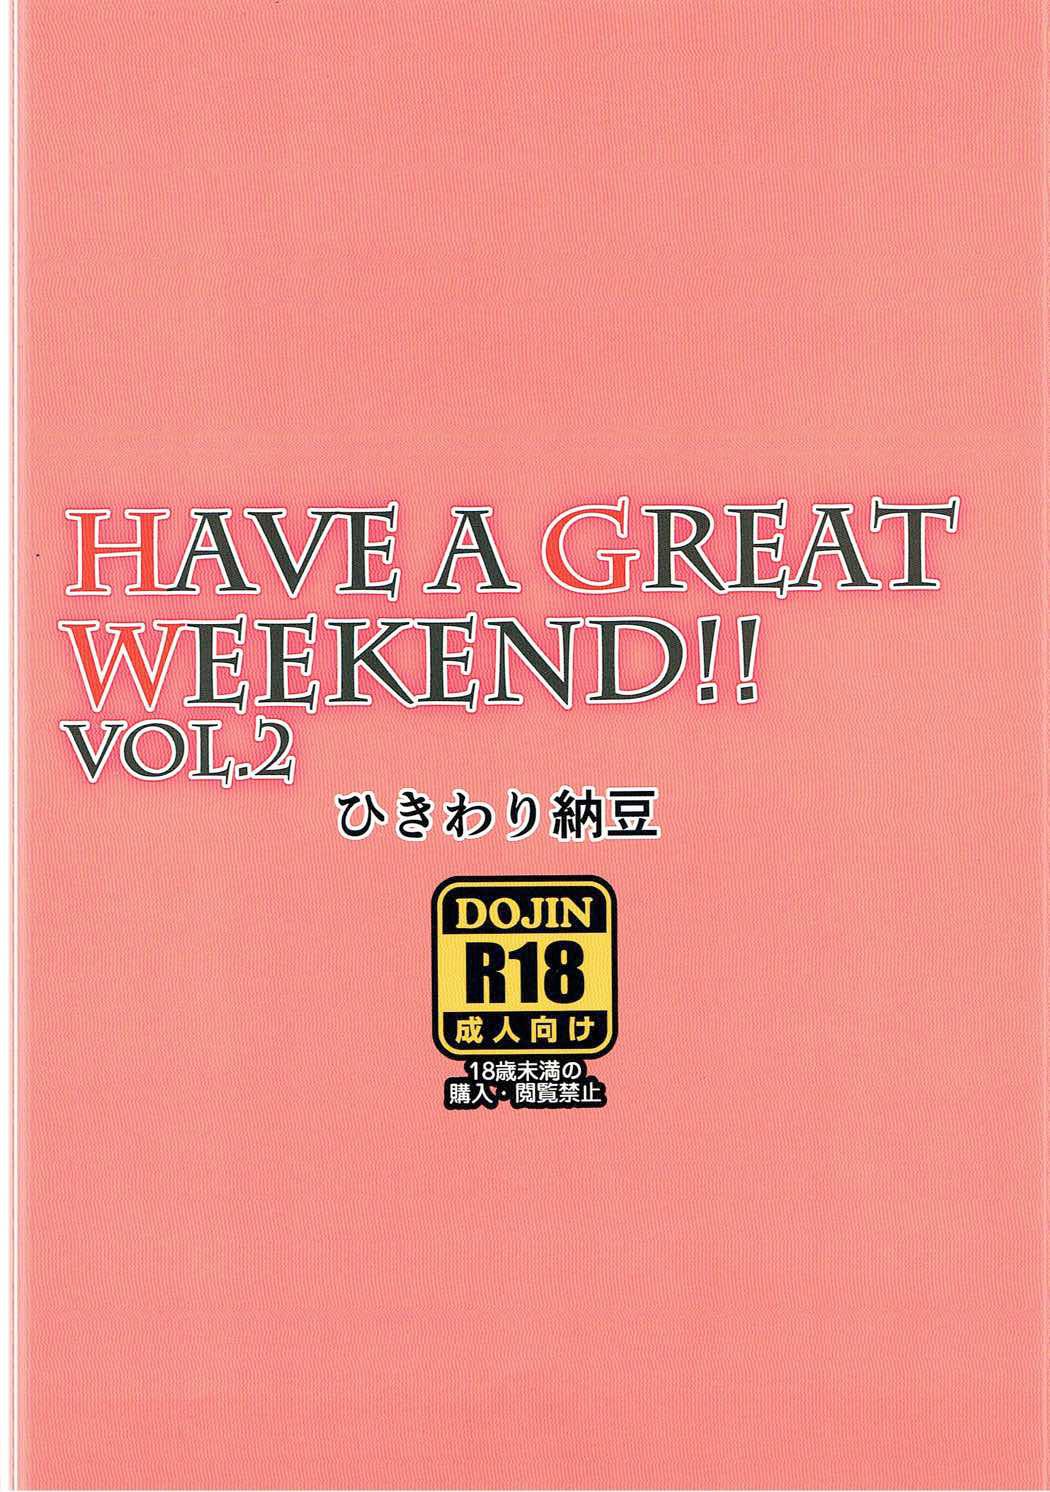 HAVE A GREAT WEEKEND!! VOL.2 36